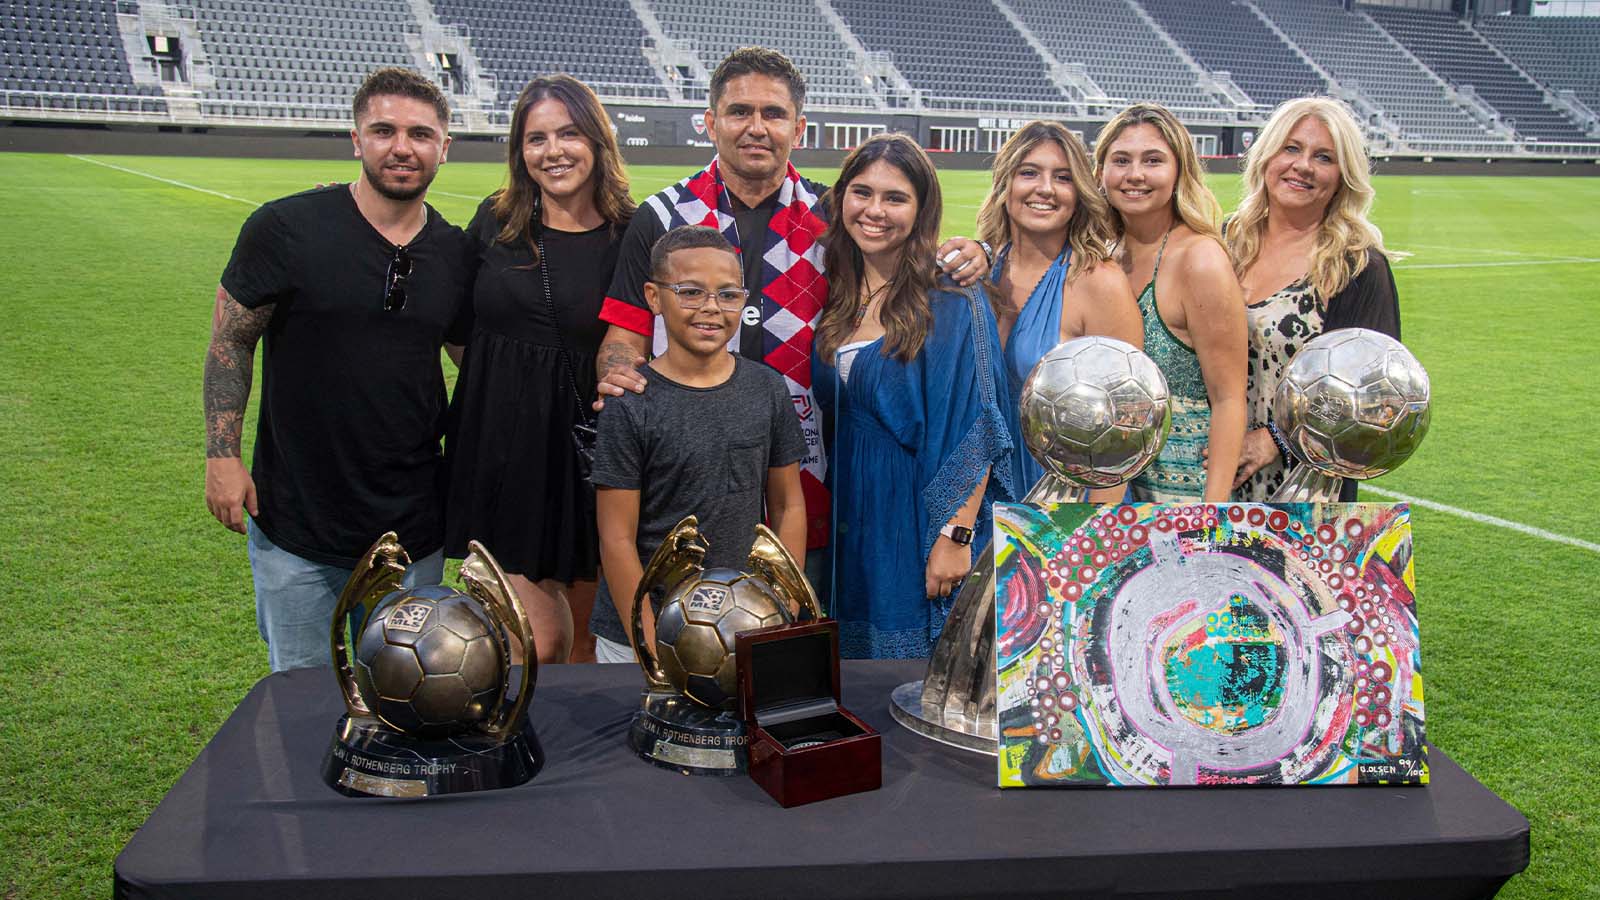 Jaime Moreno grateful to take place in National Soccer Hall of